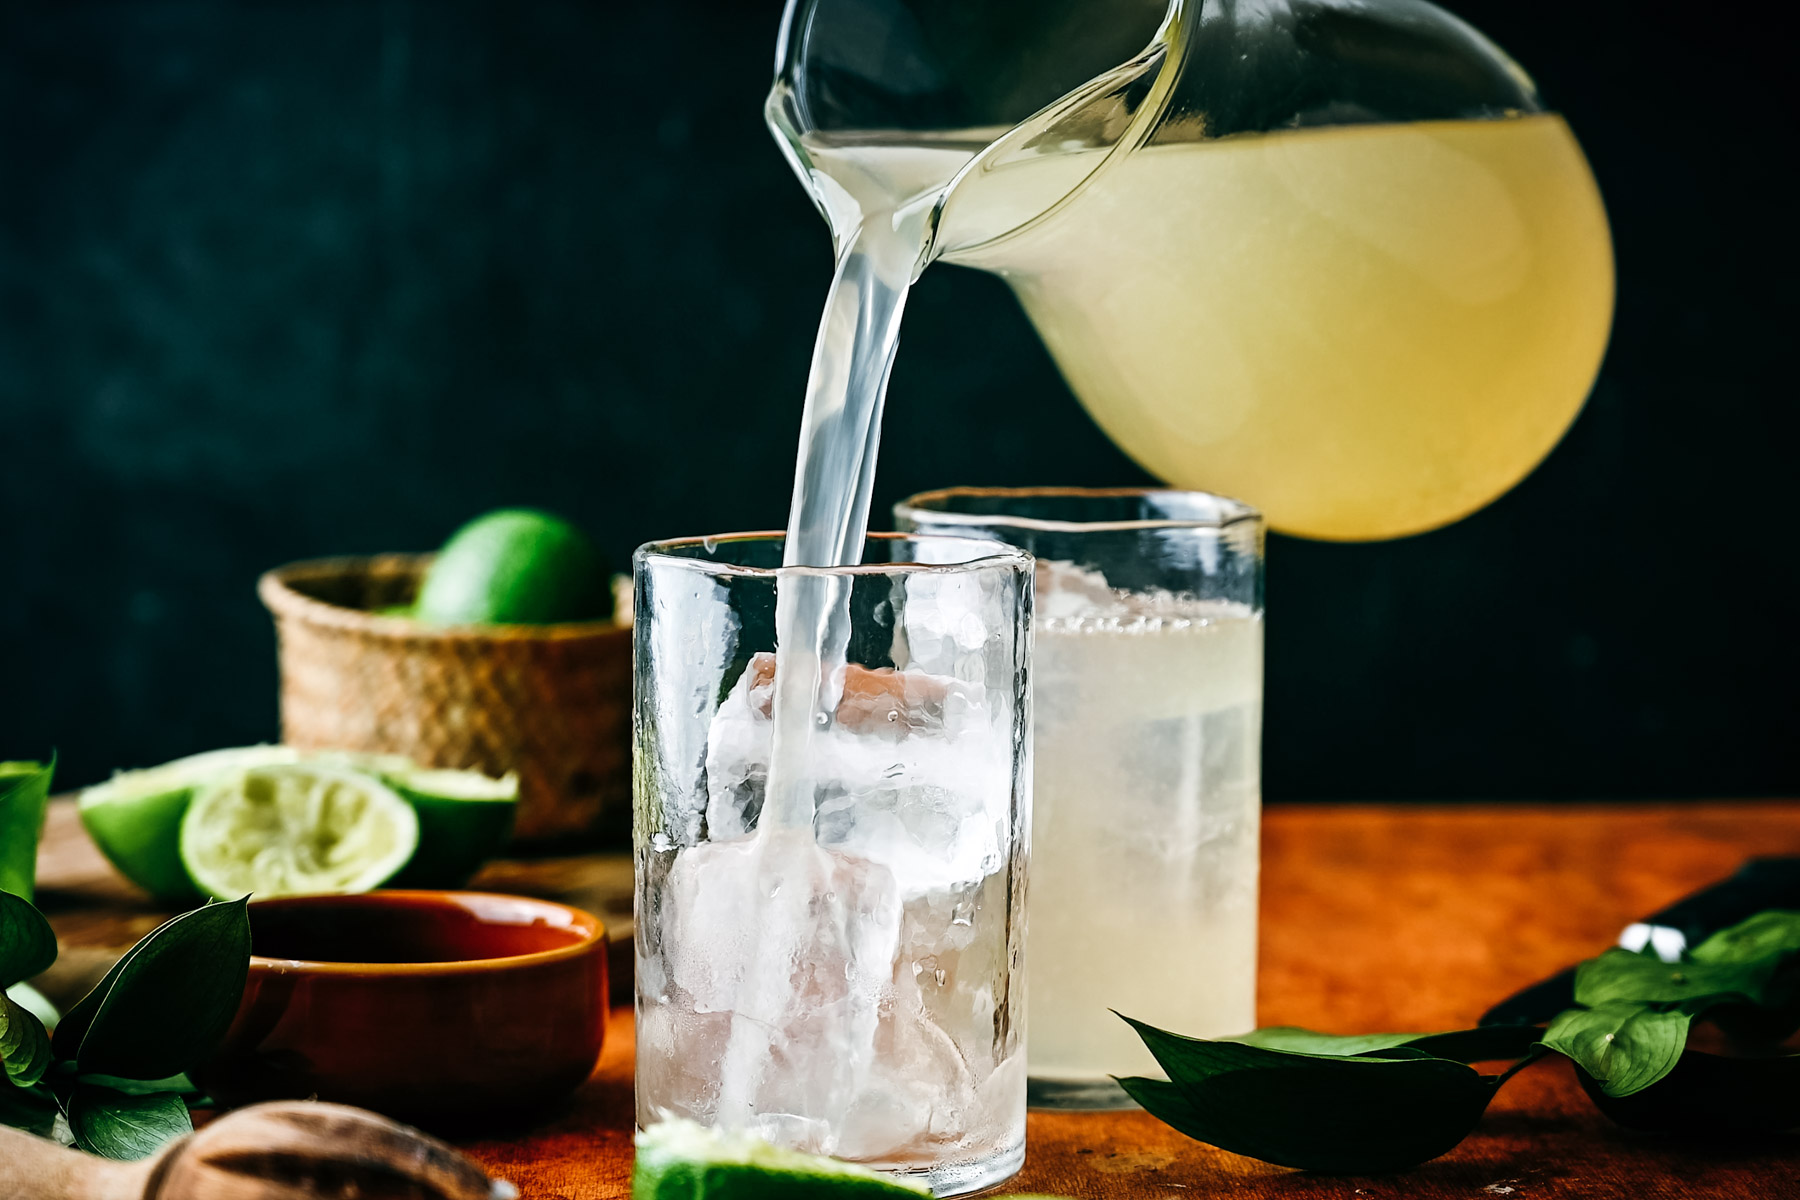 Pouring a clear, citrus drink into an ice-filled glass on a rustic table, surrounded by limes and fresh herbs.